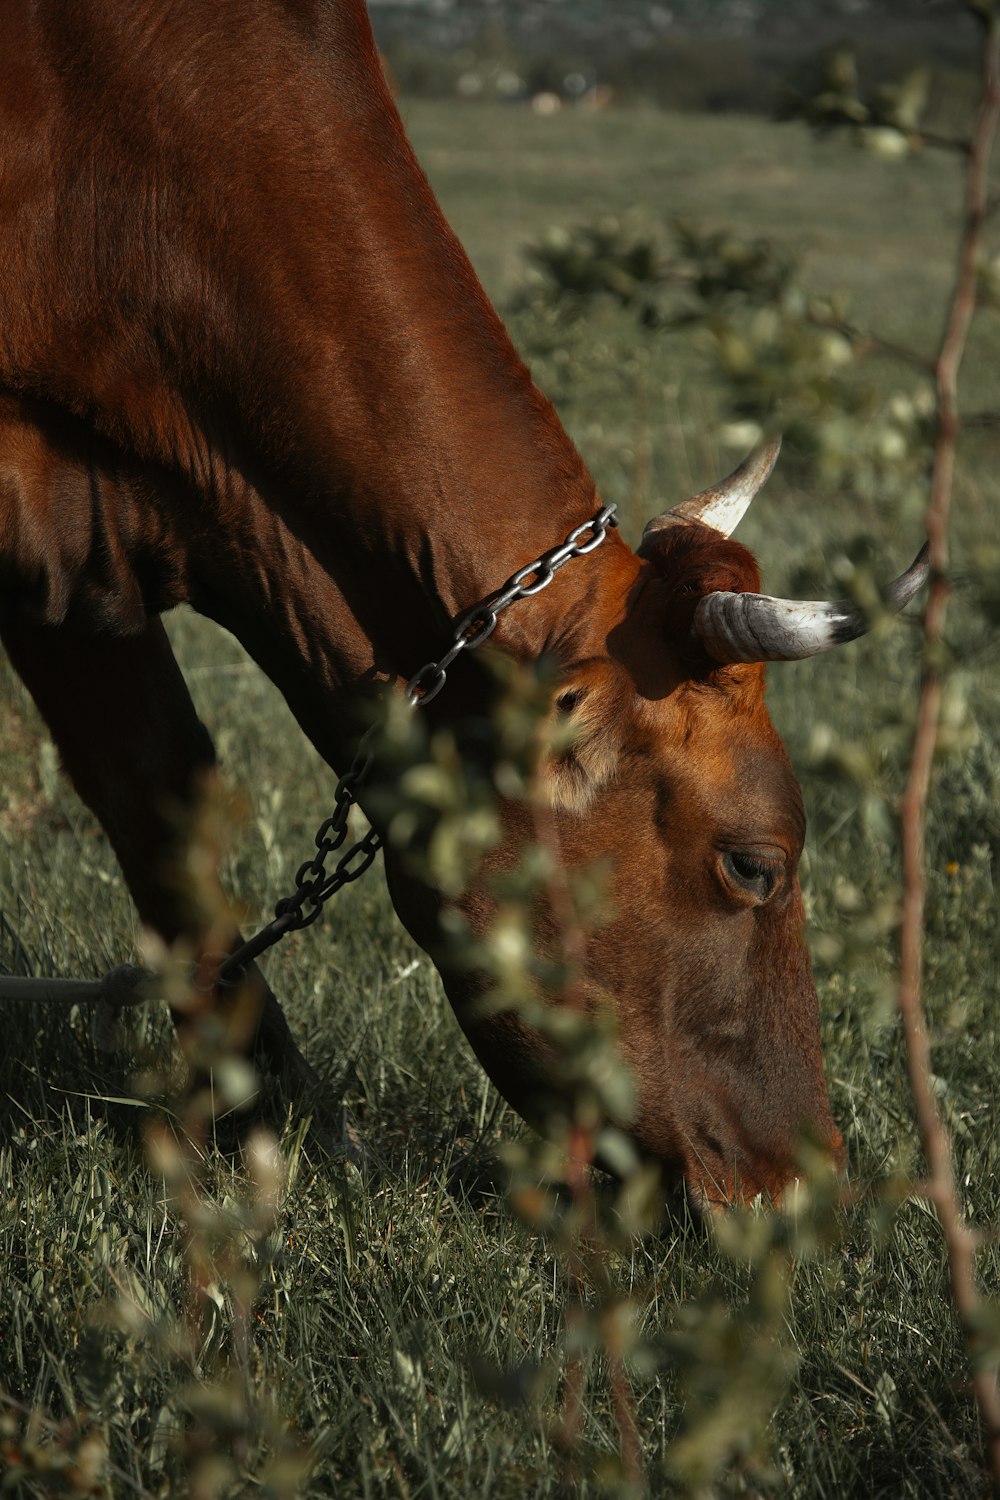 a brown cow with horns grazing in a field